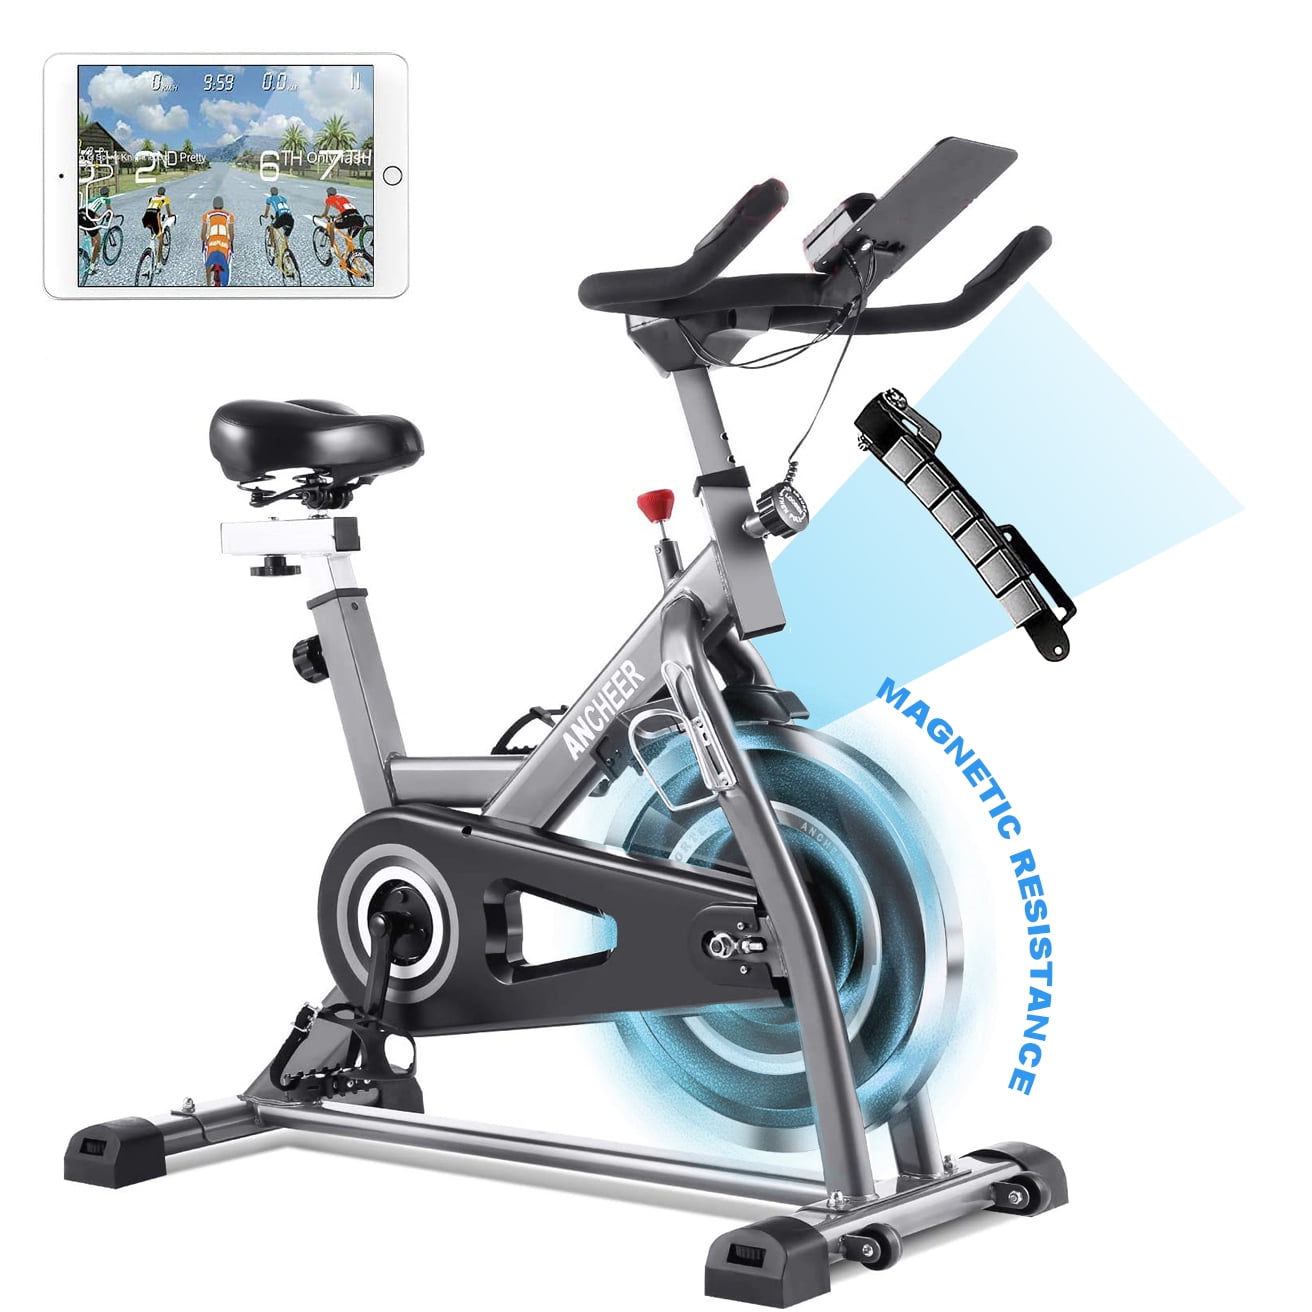 Details about   Exercise Bicycle Cycling Fitness Stationary Bike Cardio Home Indoor 2 Type StocK 